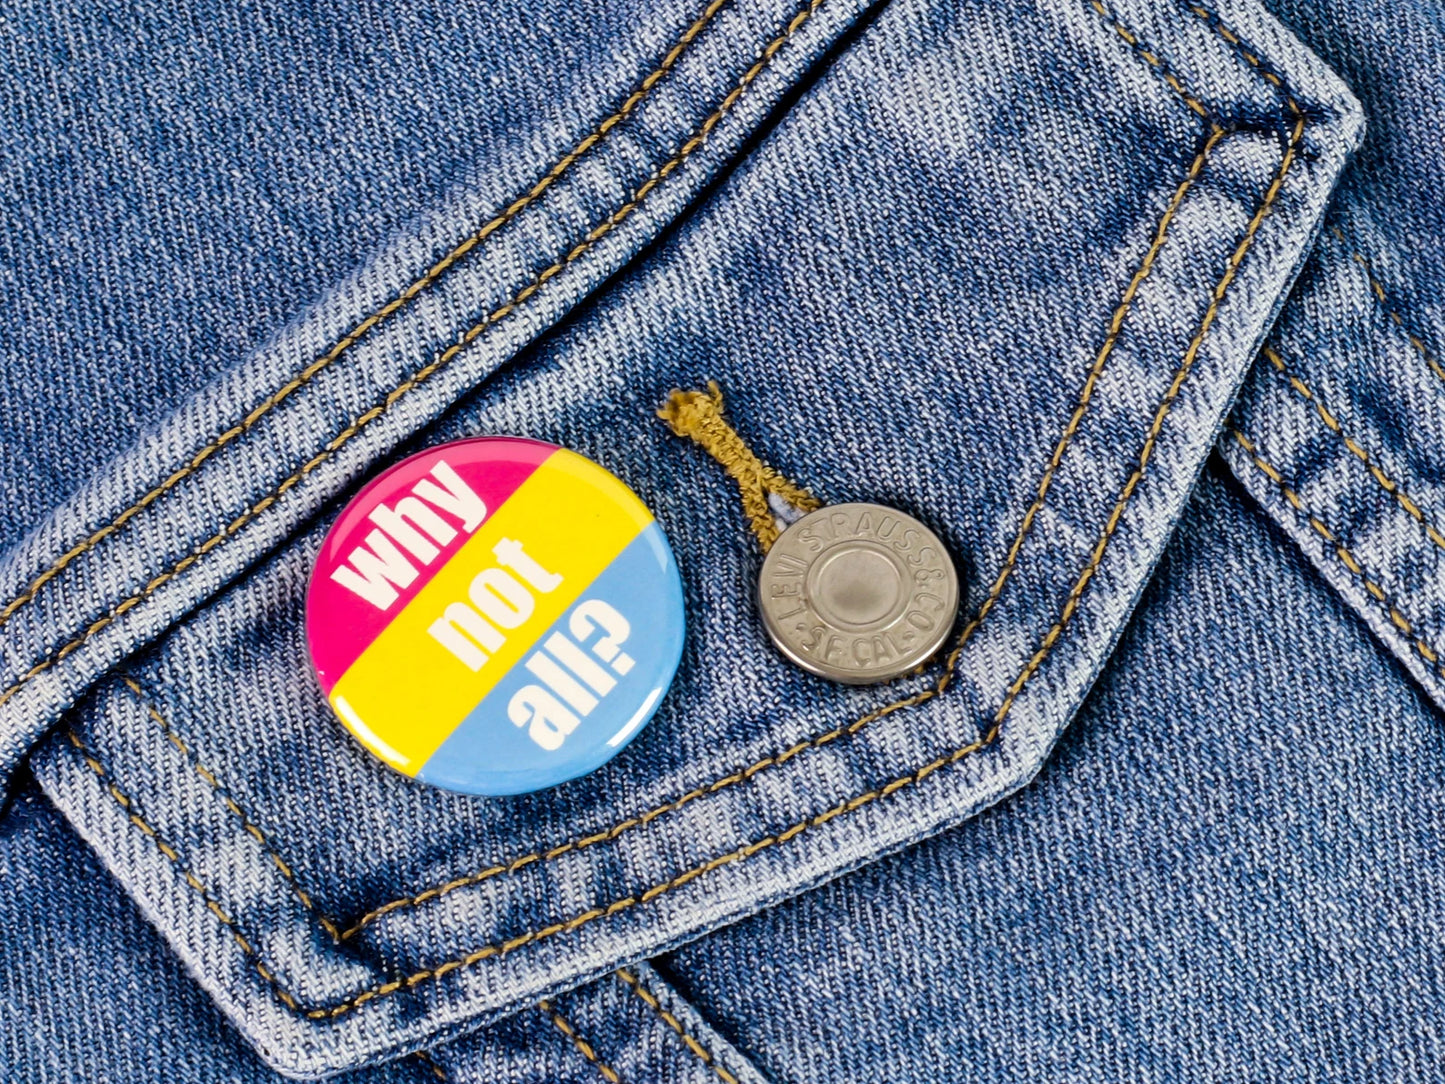 Pansexual Pride Buttons